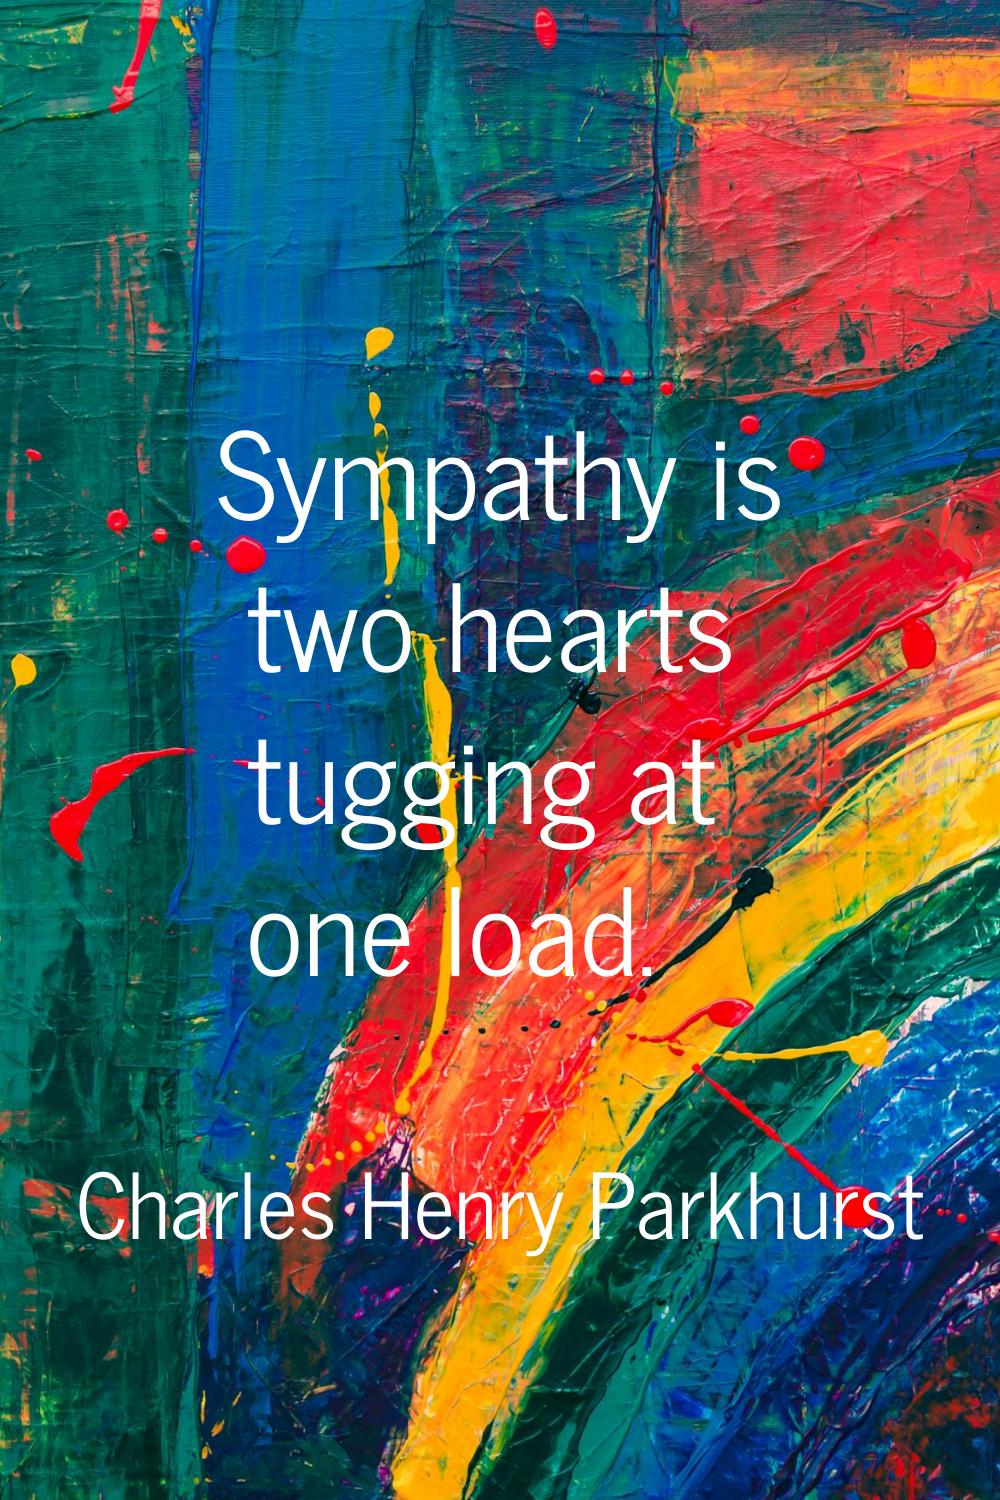 Sympathy is two hearts tugging at one load.